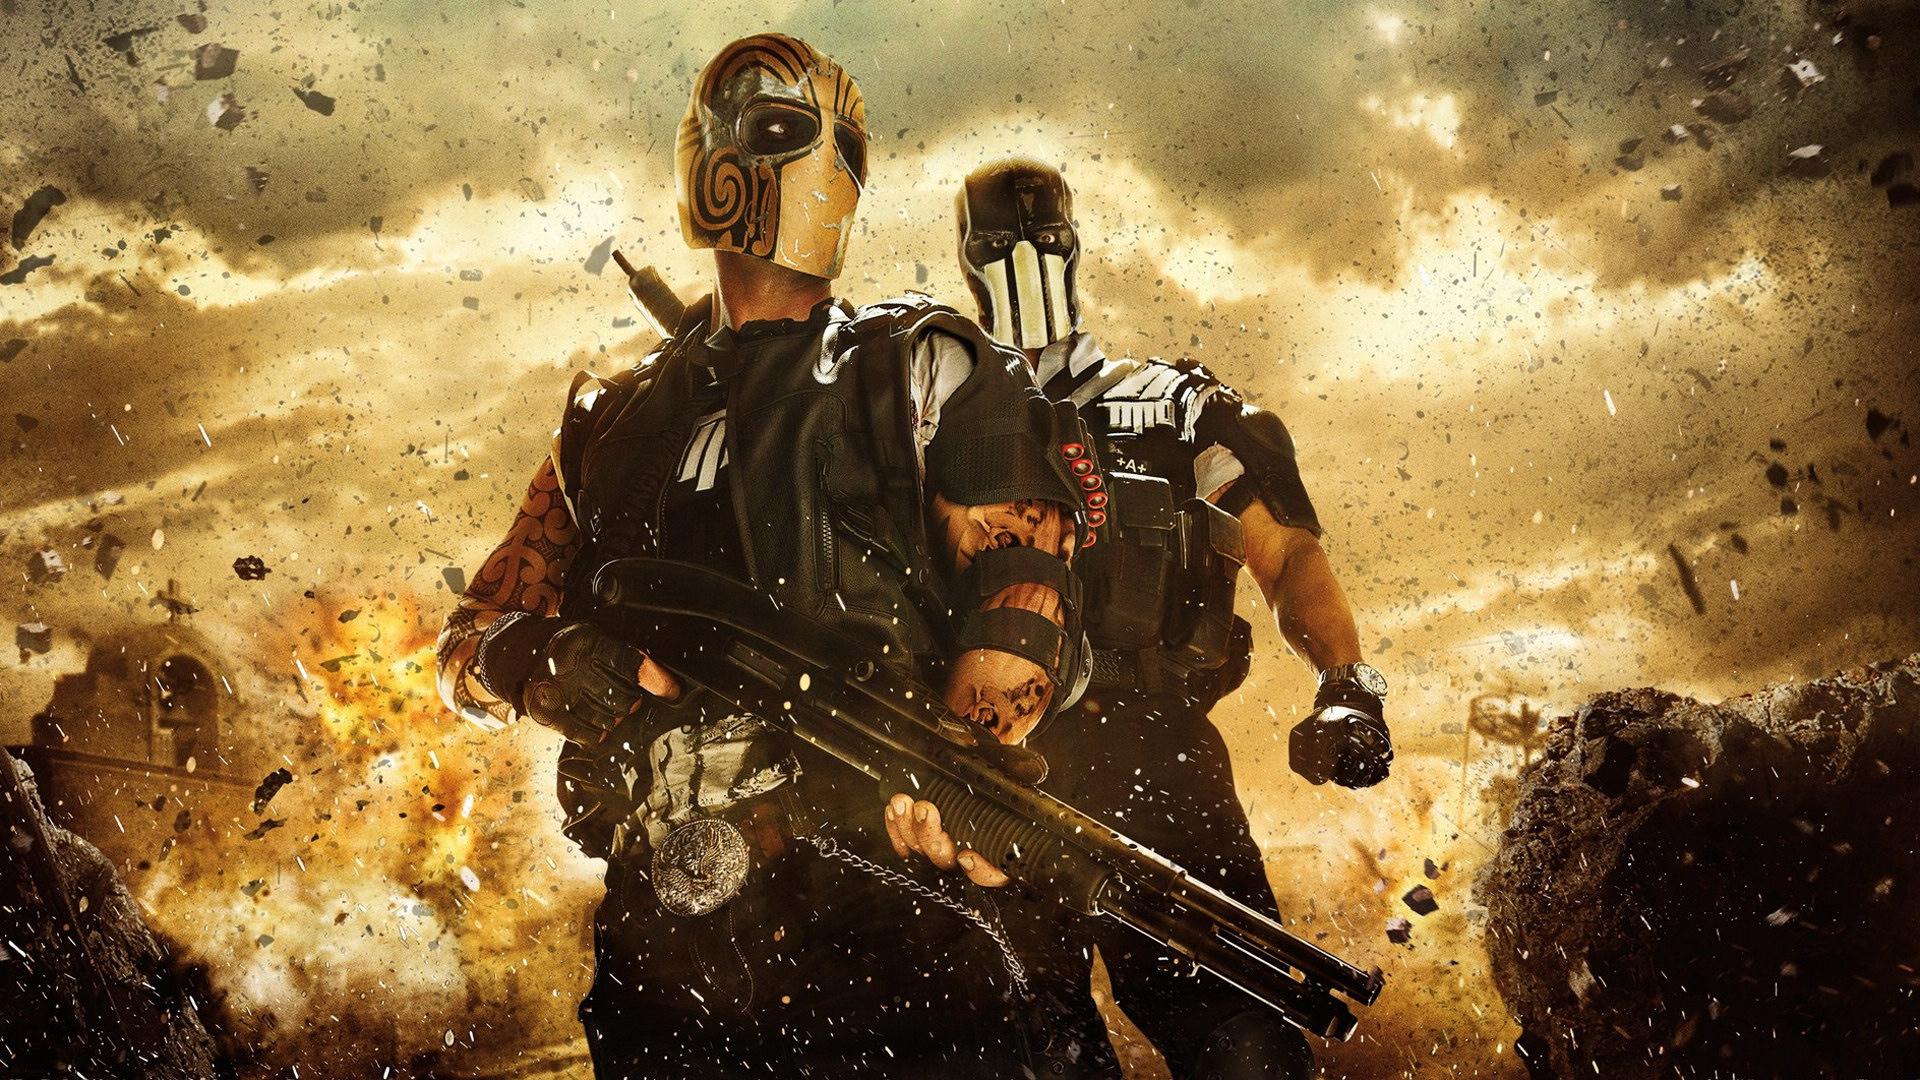 1920x1080 > Army Of Two Wallpapers